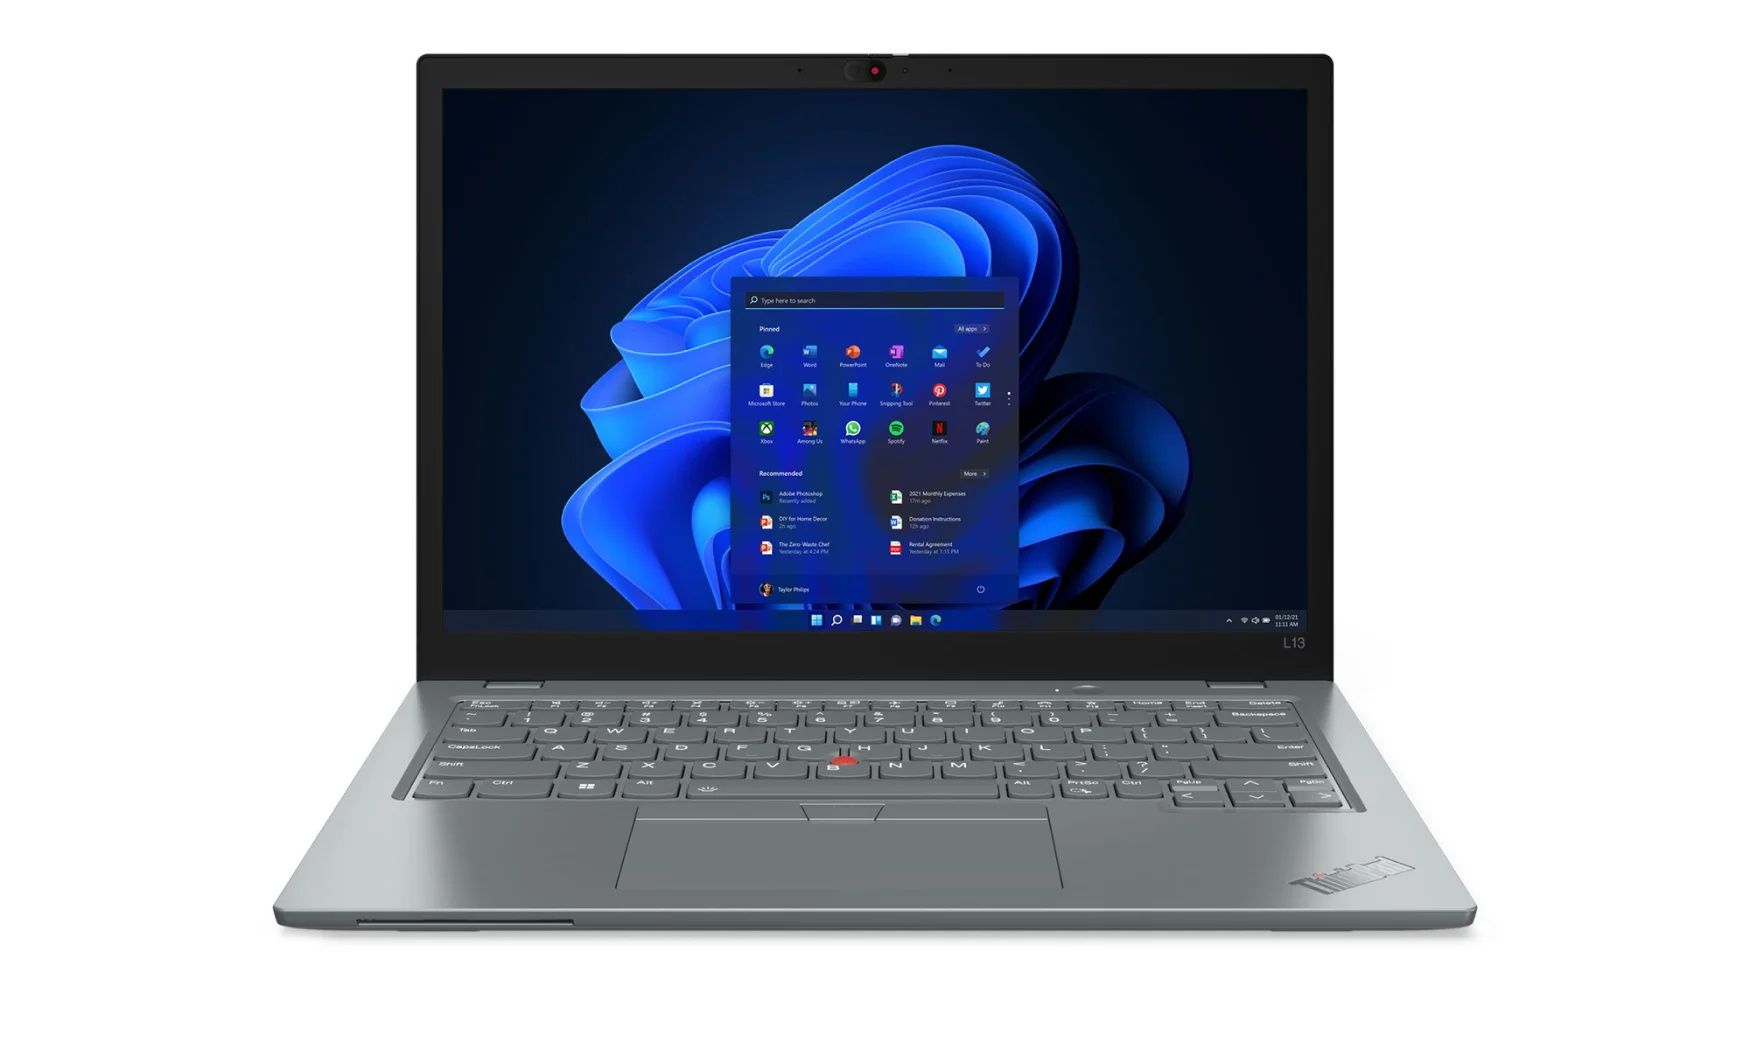 New for the ThinkPad L13 line is an optional Storm Grey color option.